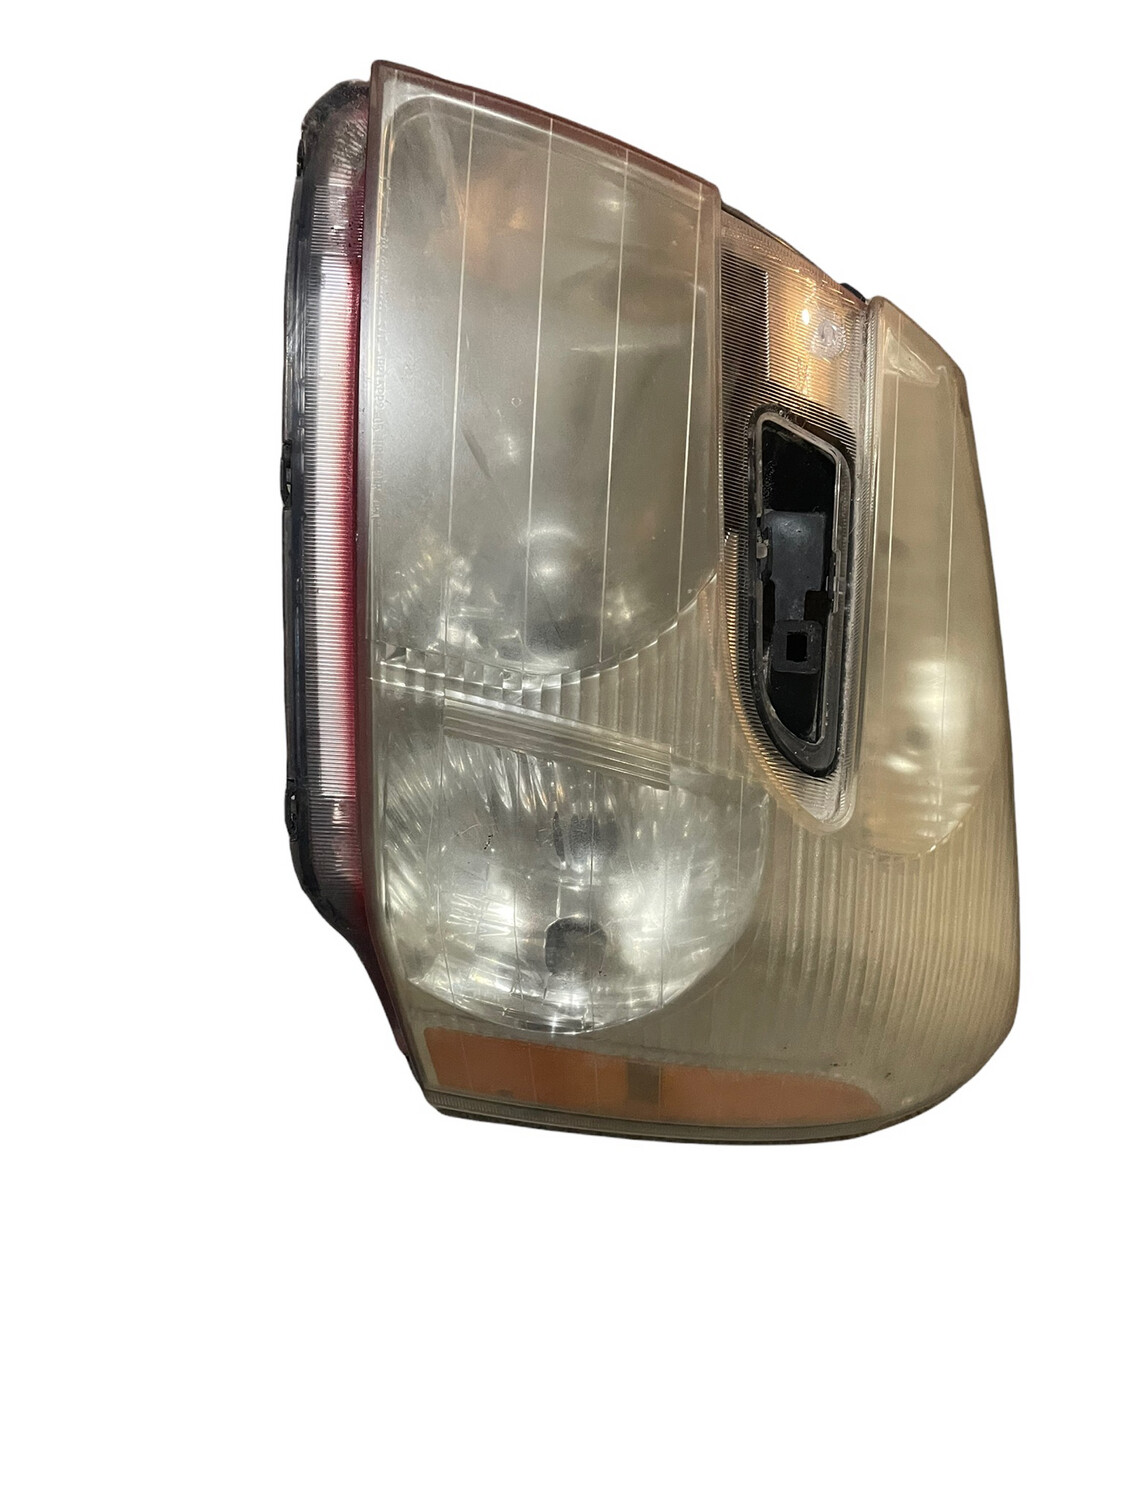 Driver Left Headlight Fits 05-09 EQUINOX 32232 ( for parts) shell housing only no lighting parts